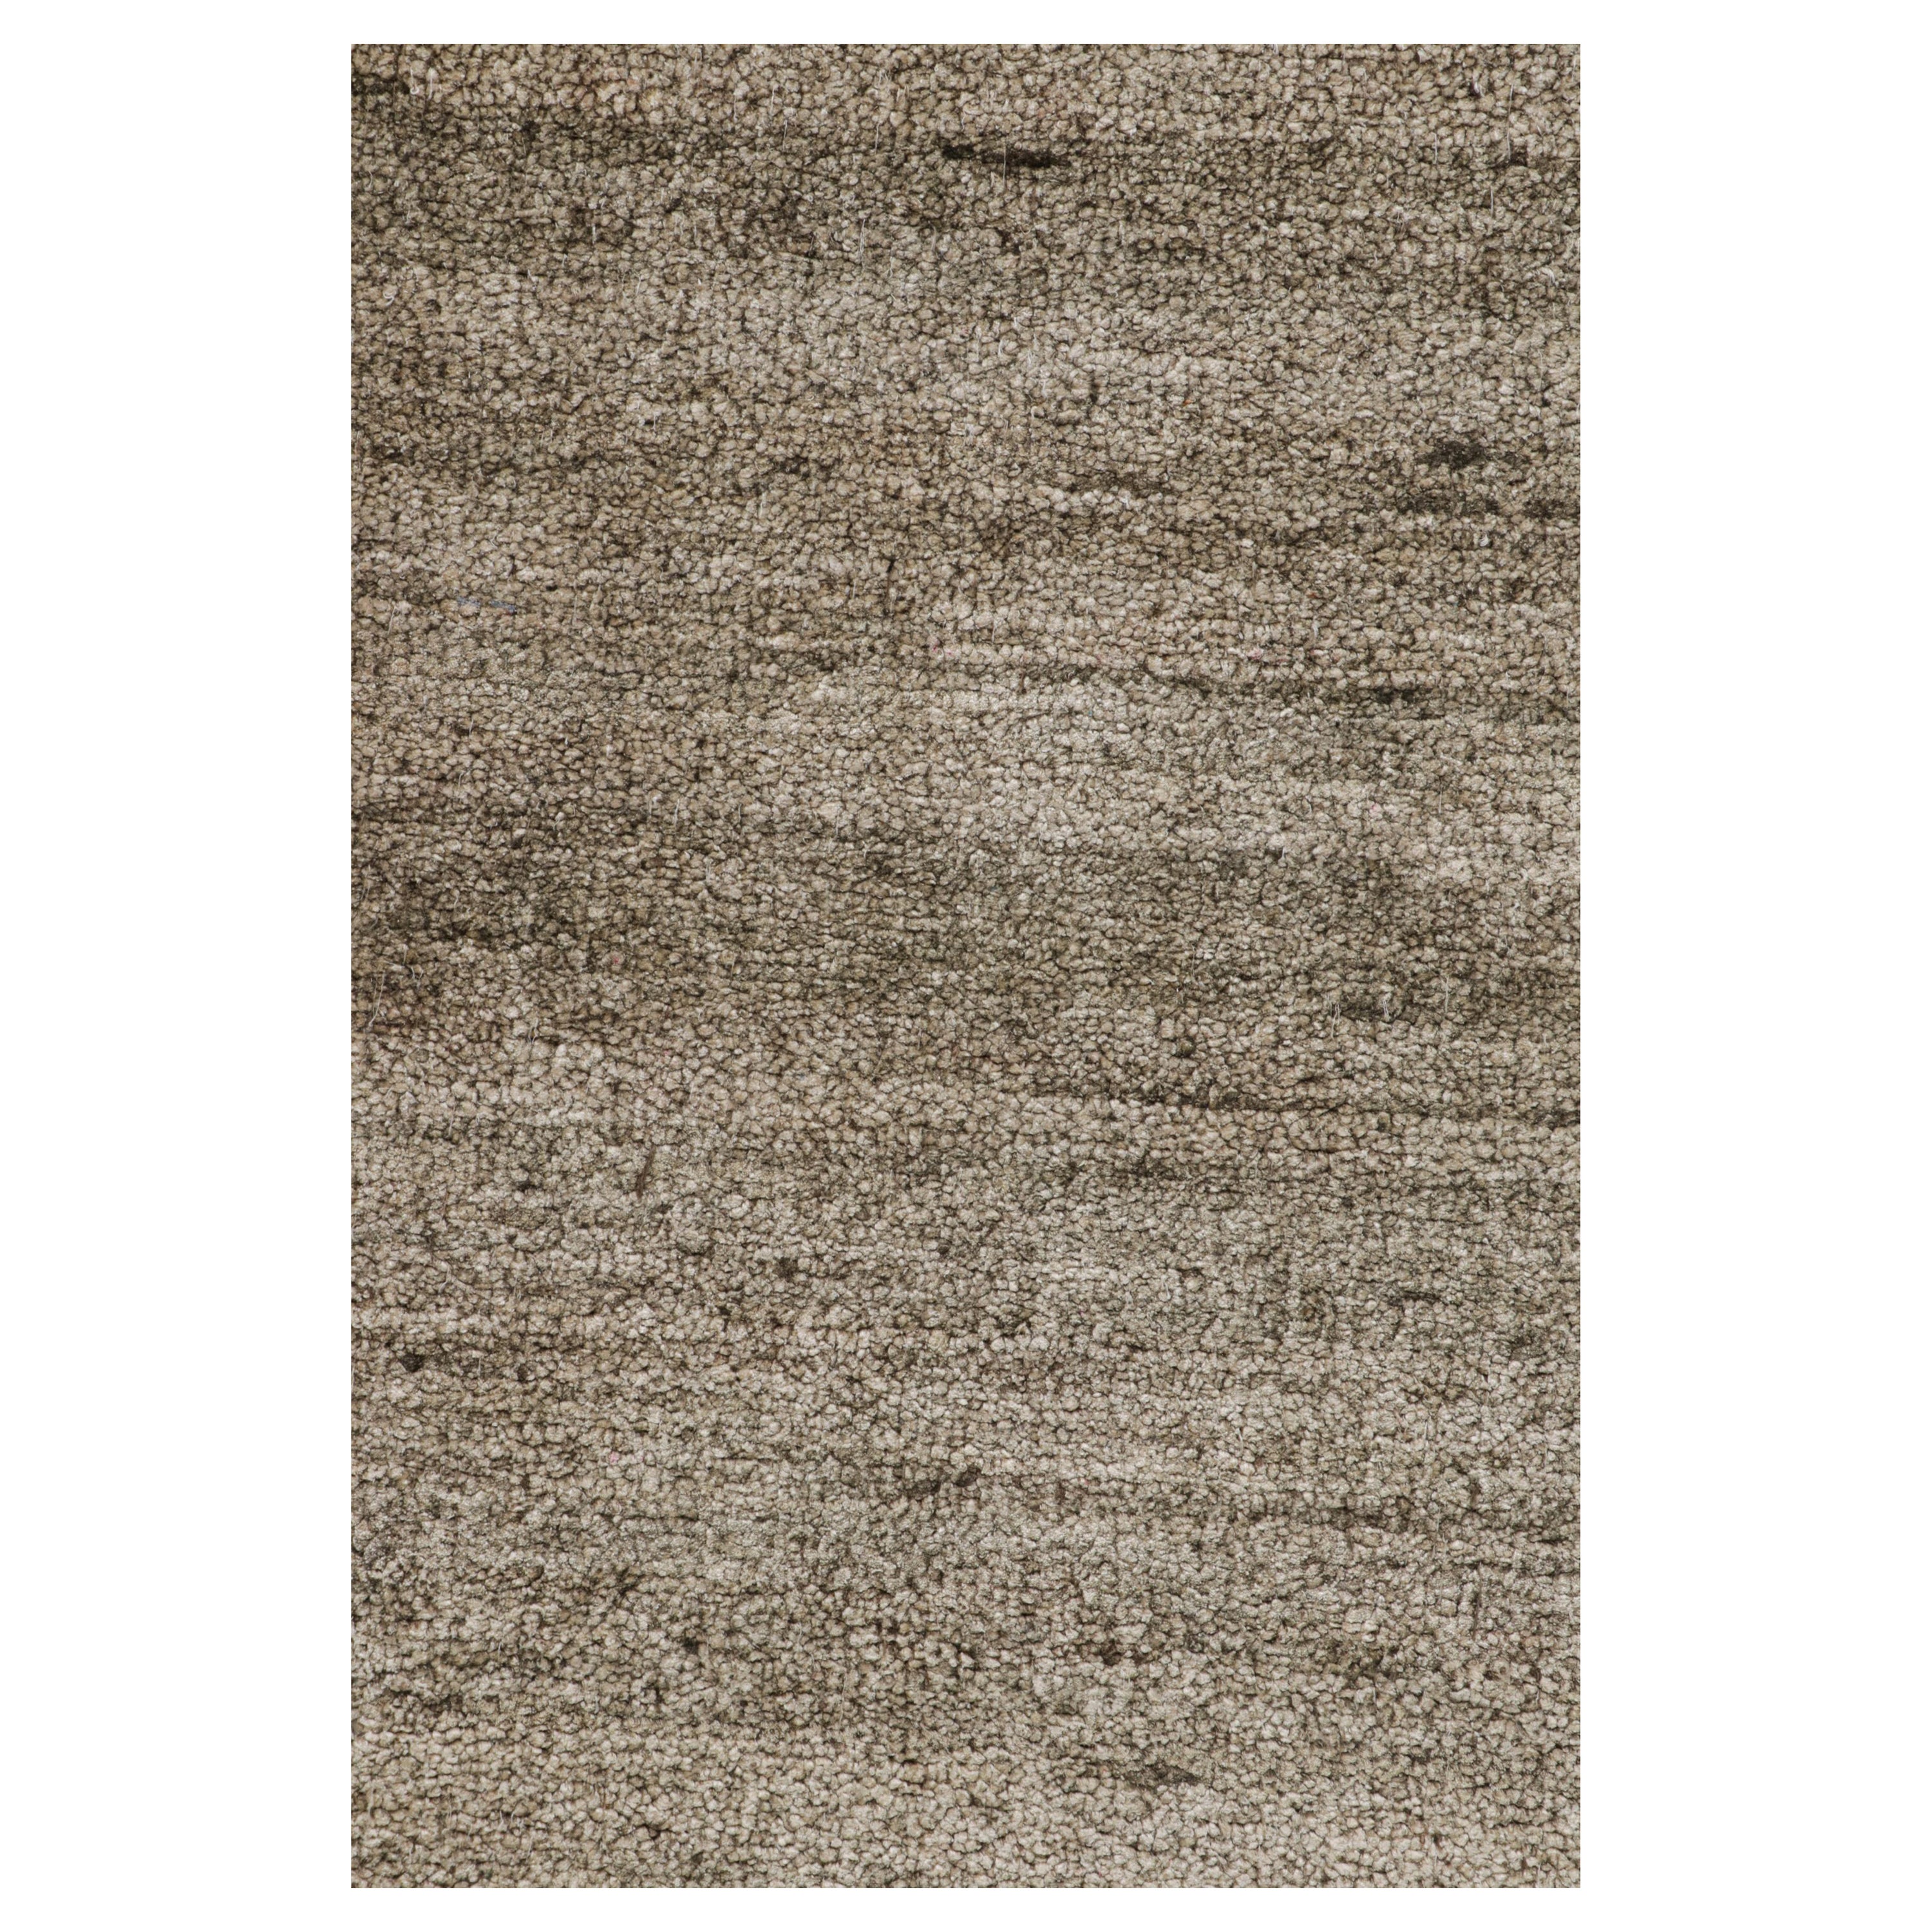 Hand-knotted in silk, this 9x10 contemporary rug from Rug & Kilim’s Texture of Color line is an inventive take on solid rugs with movement in its subtle striae. 

On the Design: 

The collection enjoys an inventive take on plain rugs, and a